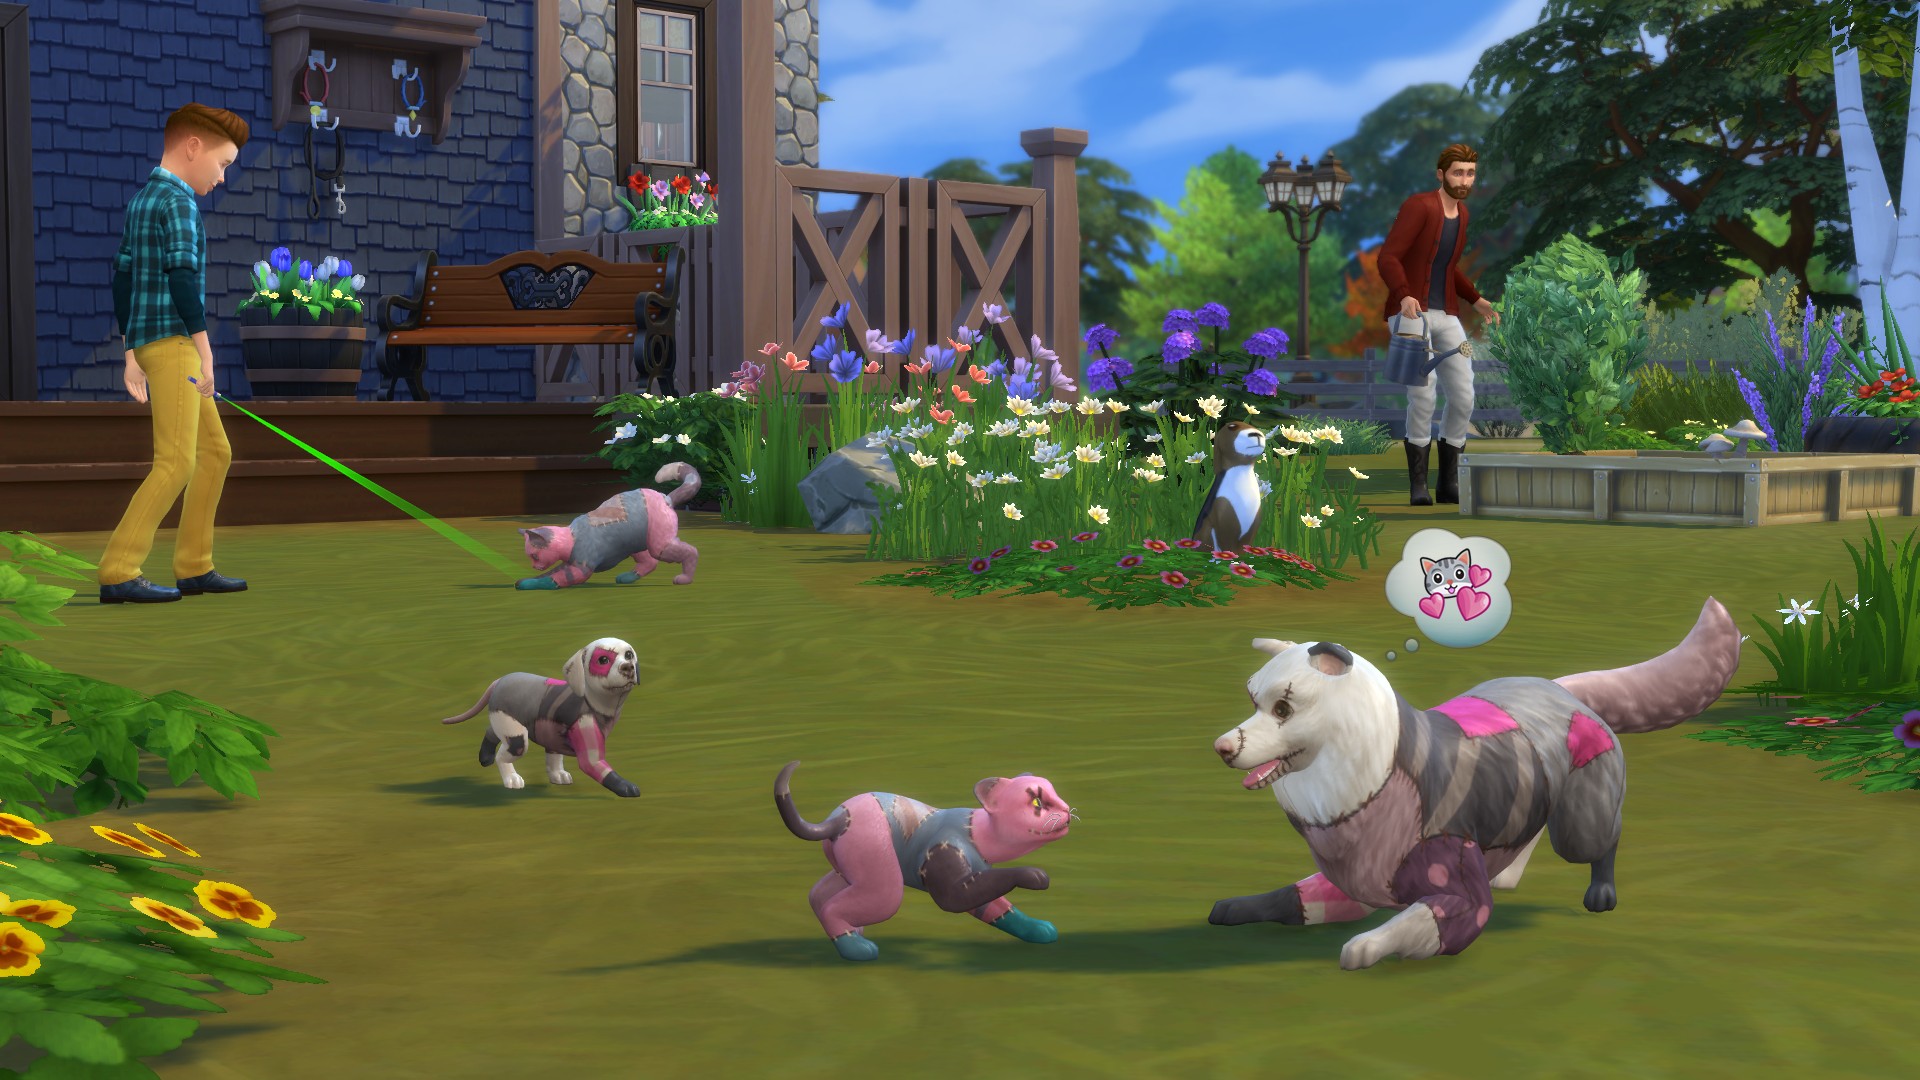 The Sims 4 Cats and Dogs Screenshot